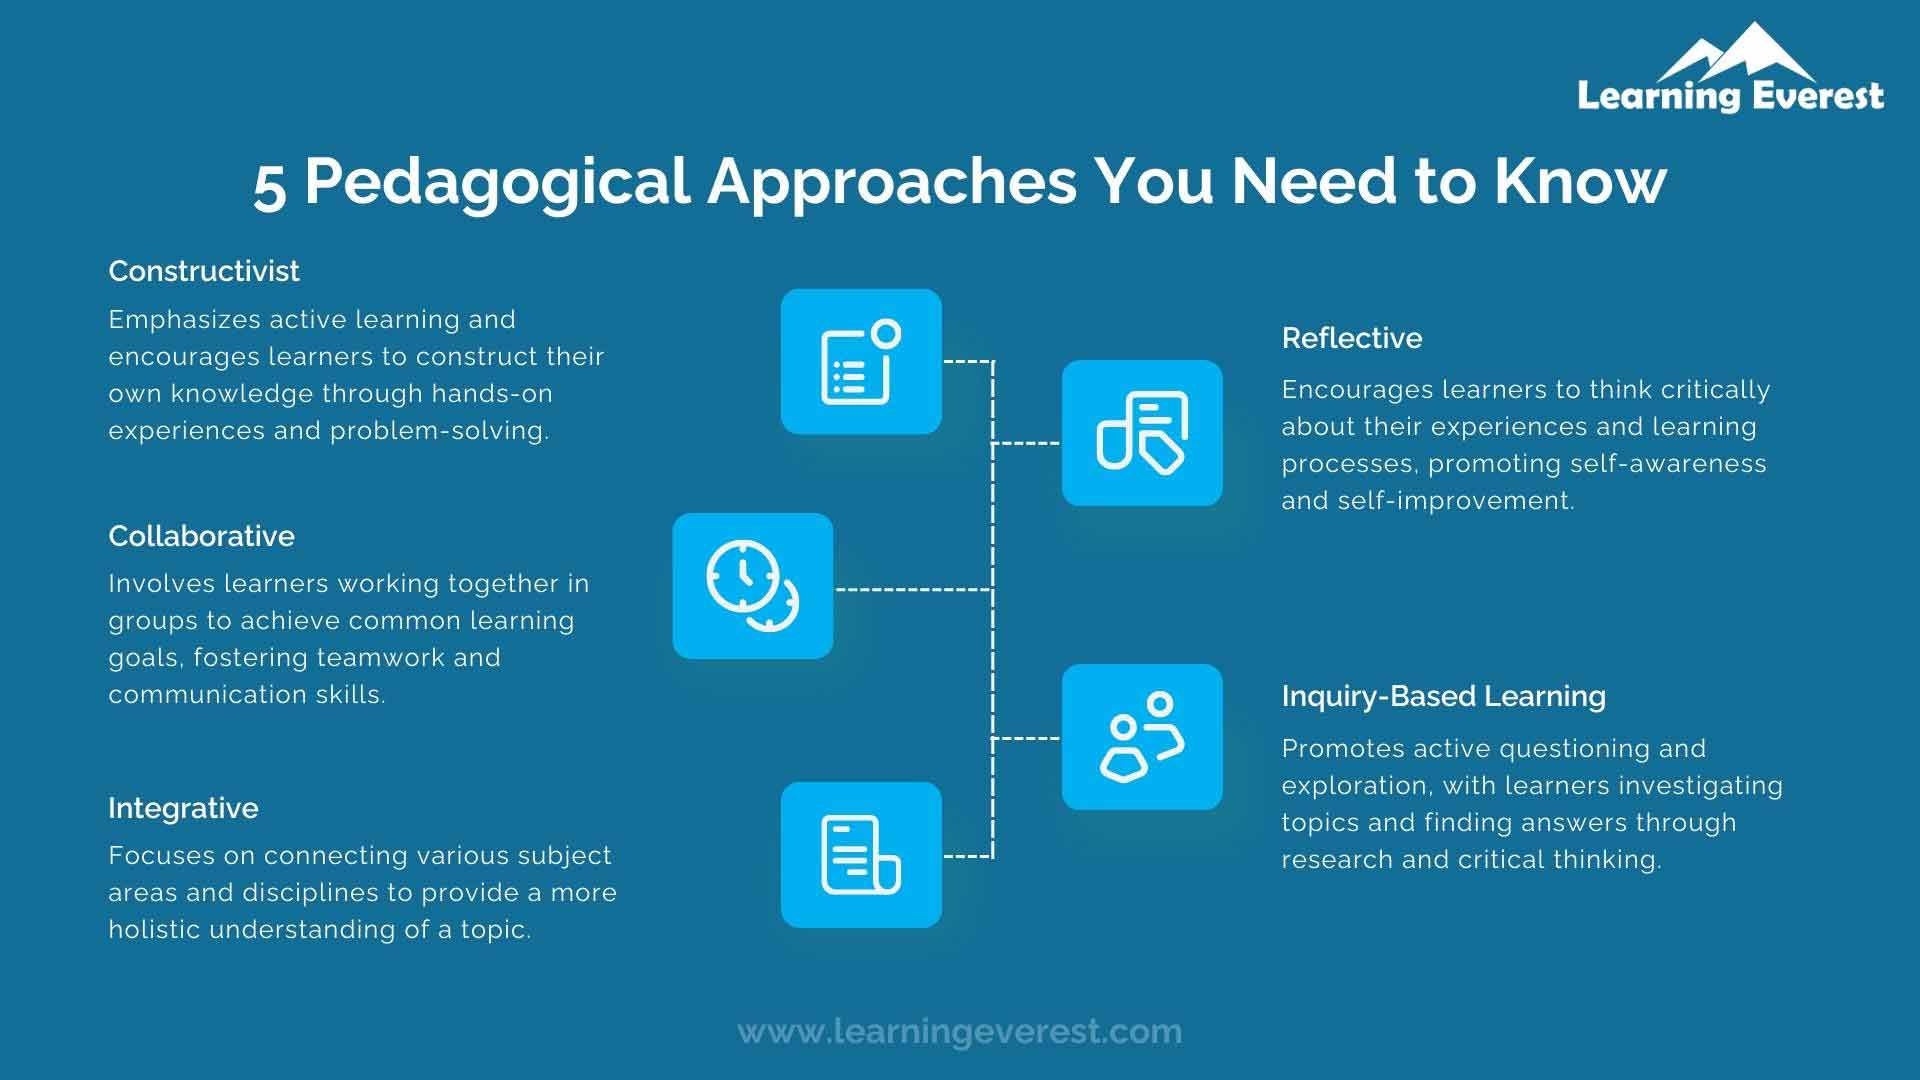 5 Pedagogical Approaches You Need to Know